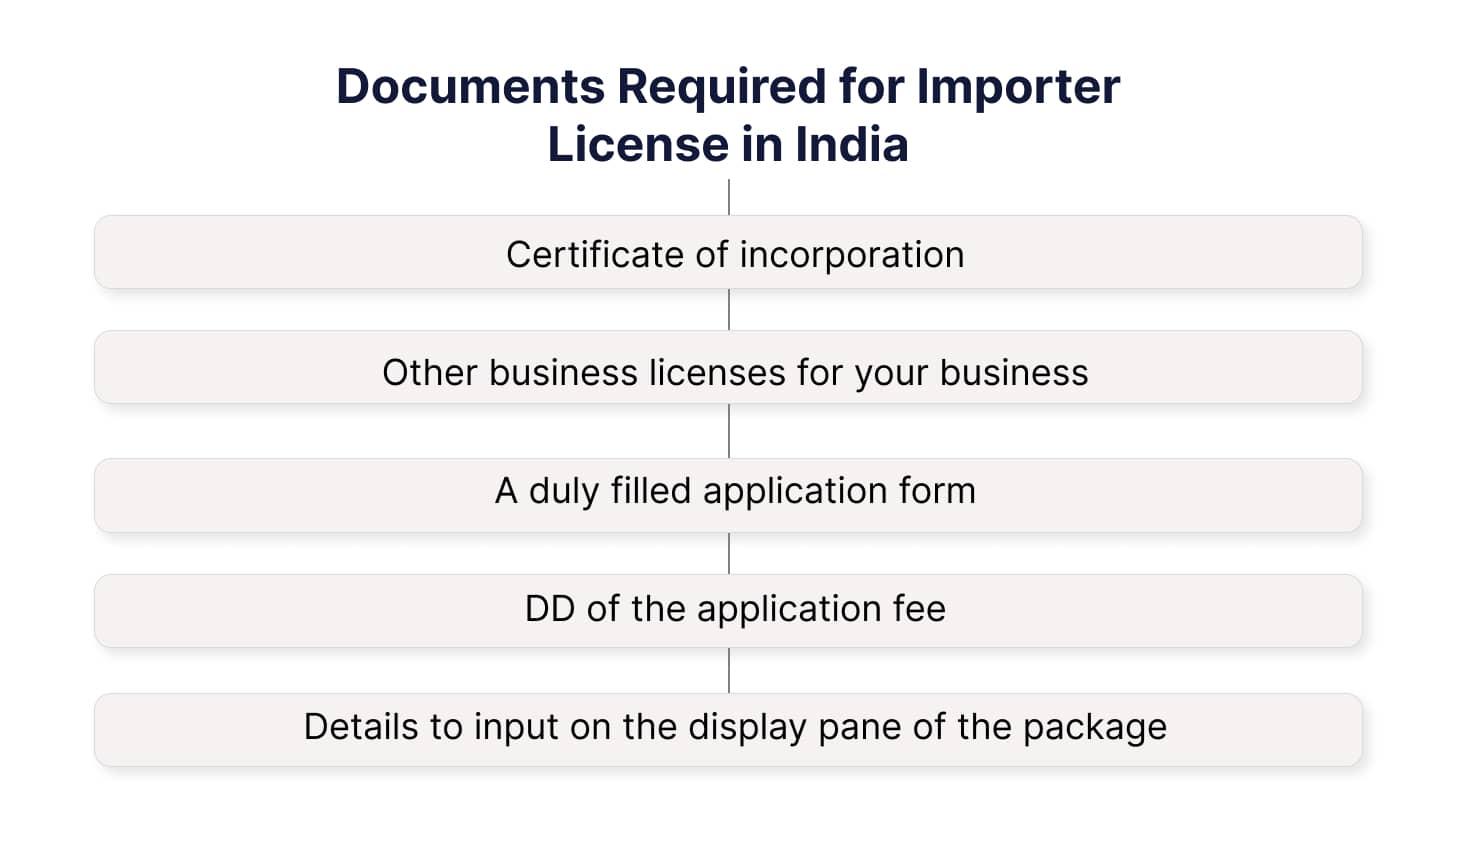 Documents Required for Importer License in India